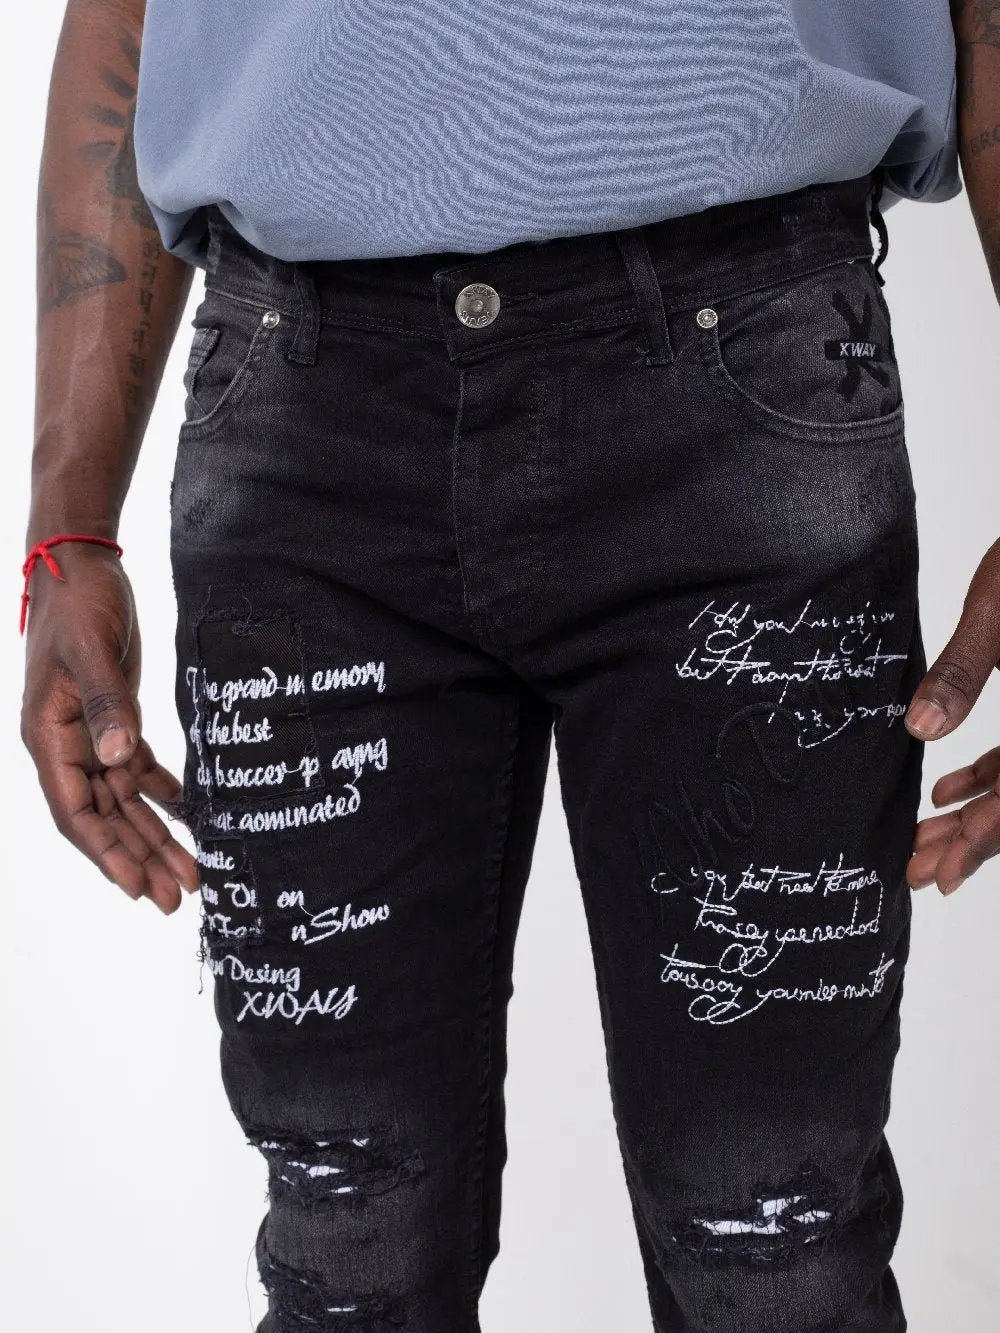 A man wearing Black Stone jeans with writing on them.